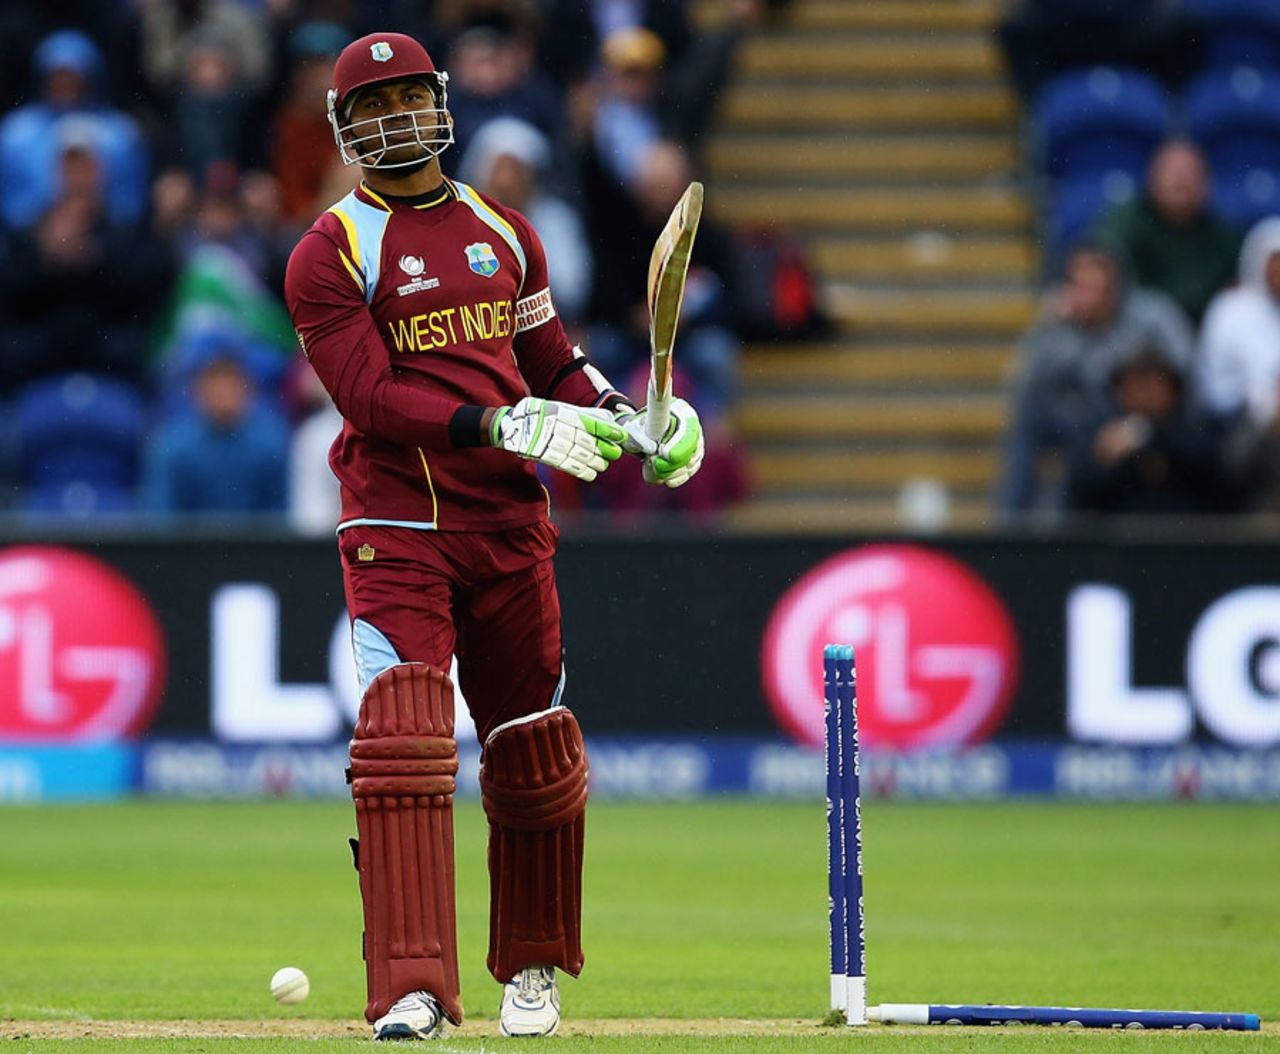 Marlon Samuels is dejected after having his middle stump castled, South Africa v West Indies, Champions Trophy, Group B, Cardiff, June 14, 2013